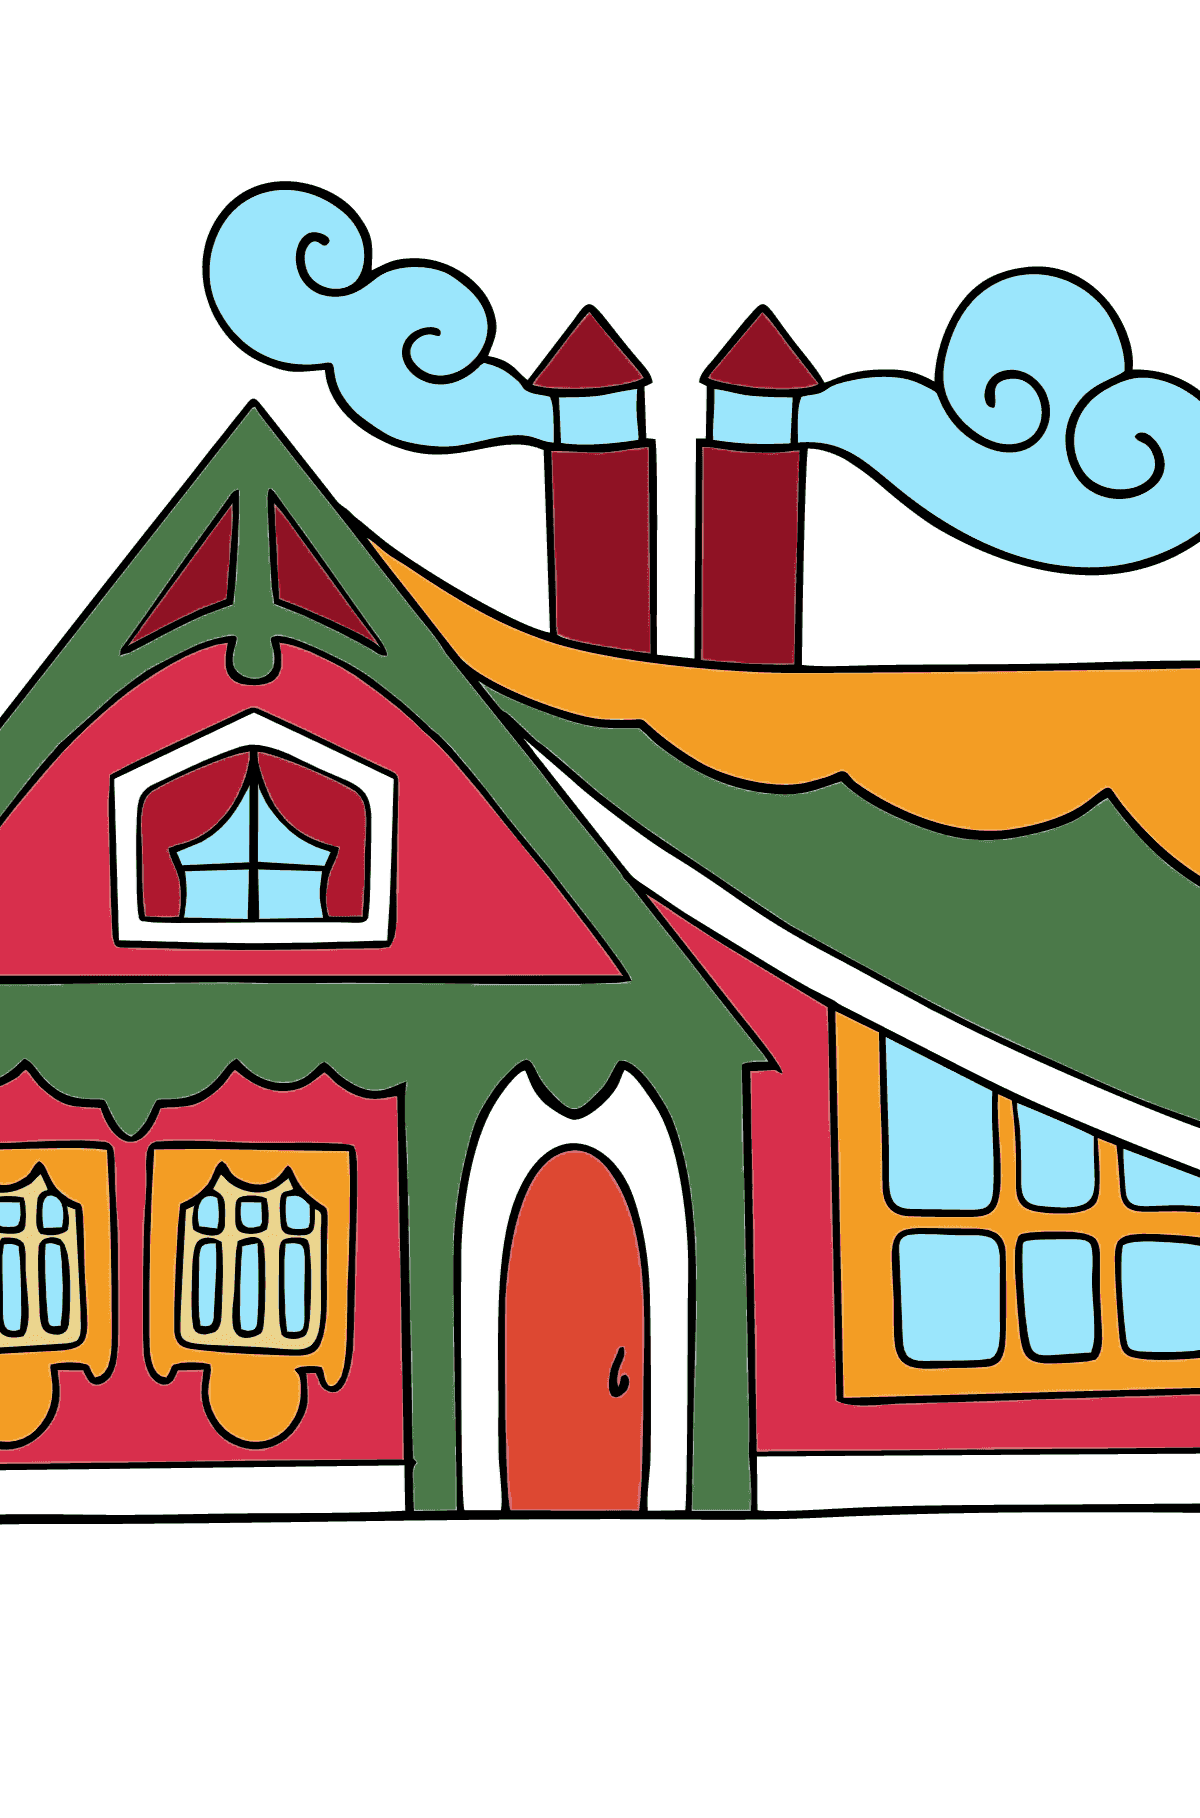 Tiny House Coloring Page (difficult) - Coloring Pages for Kids